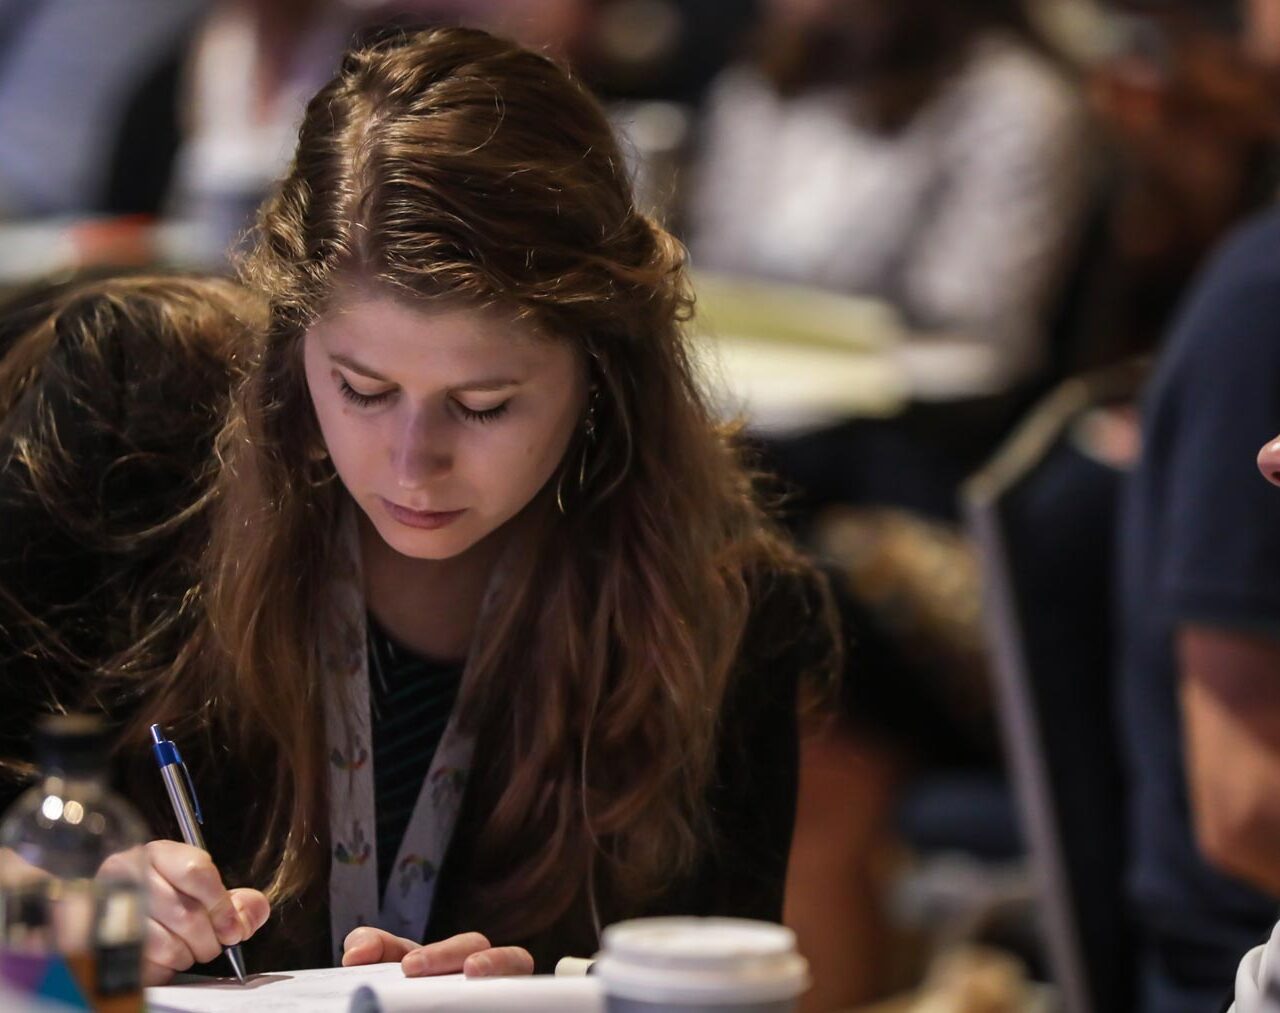 Woman taking notes at a conference